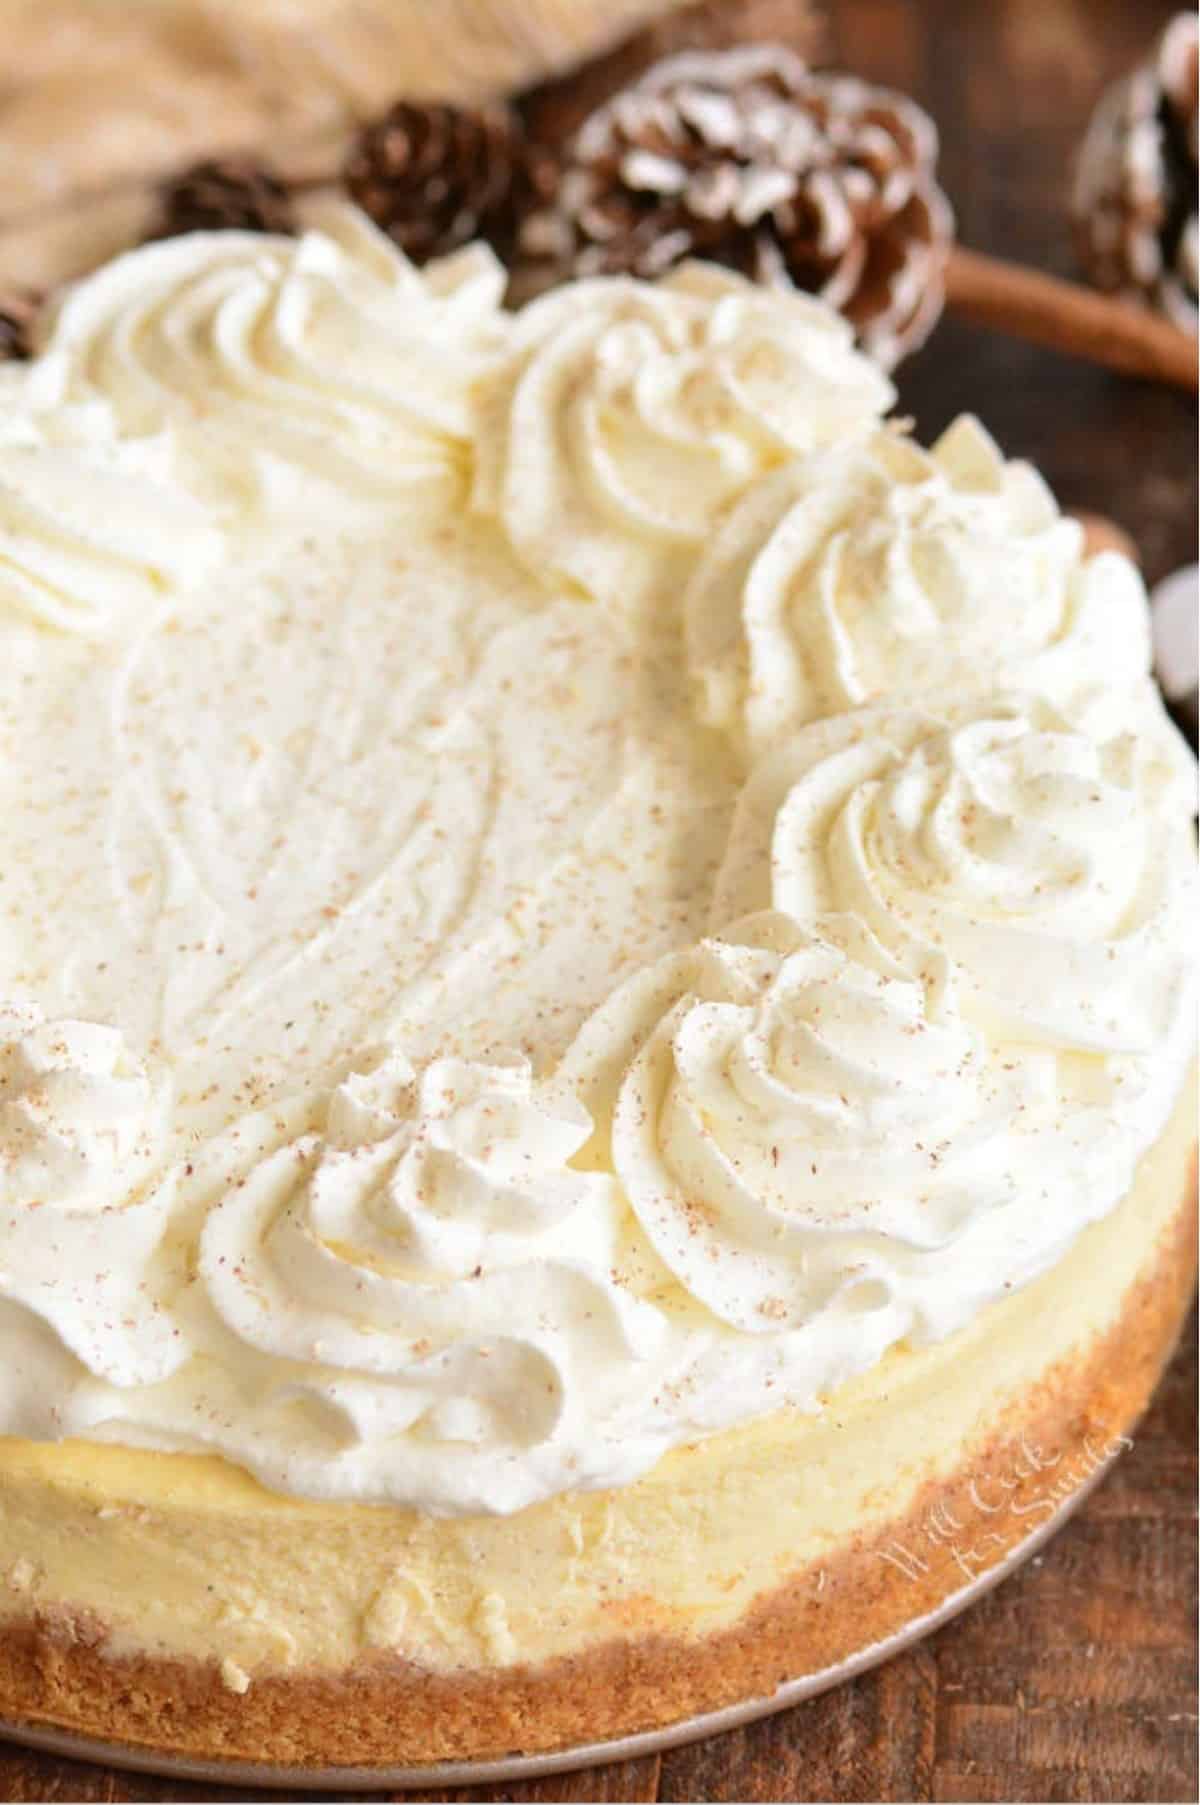 Eggnog Cheesecake with topping on a wood surface.